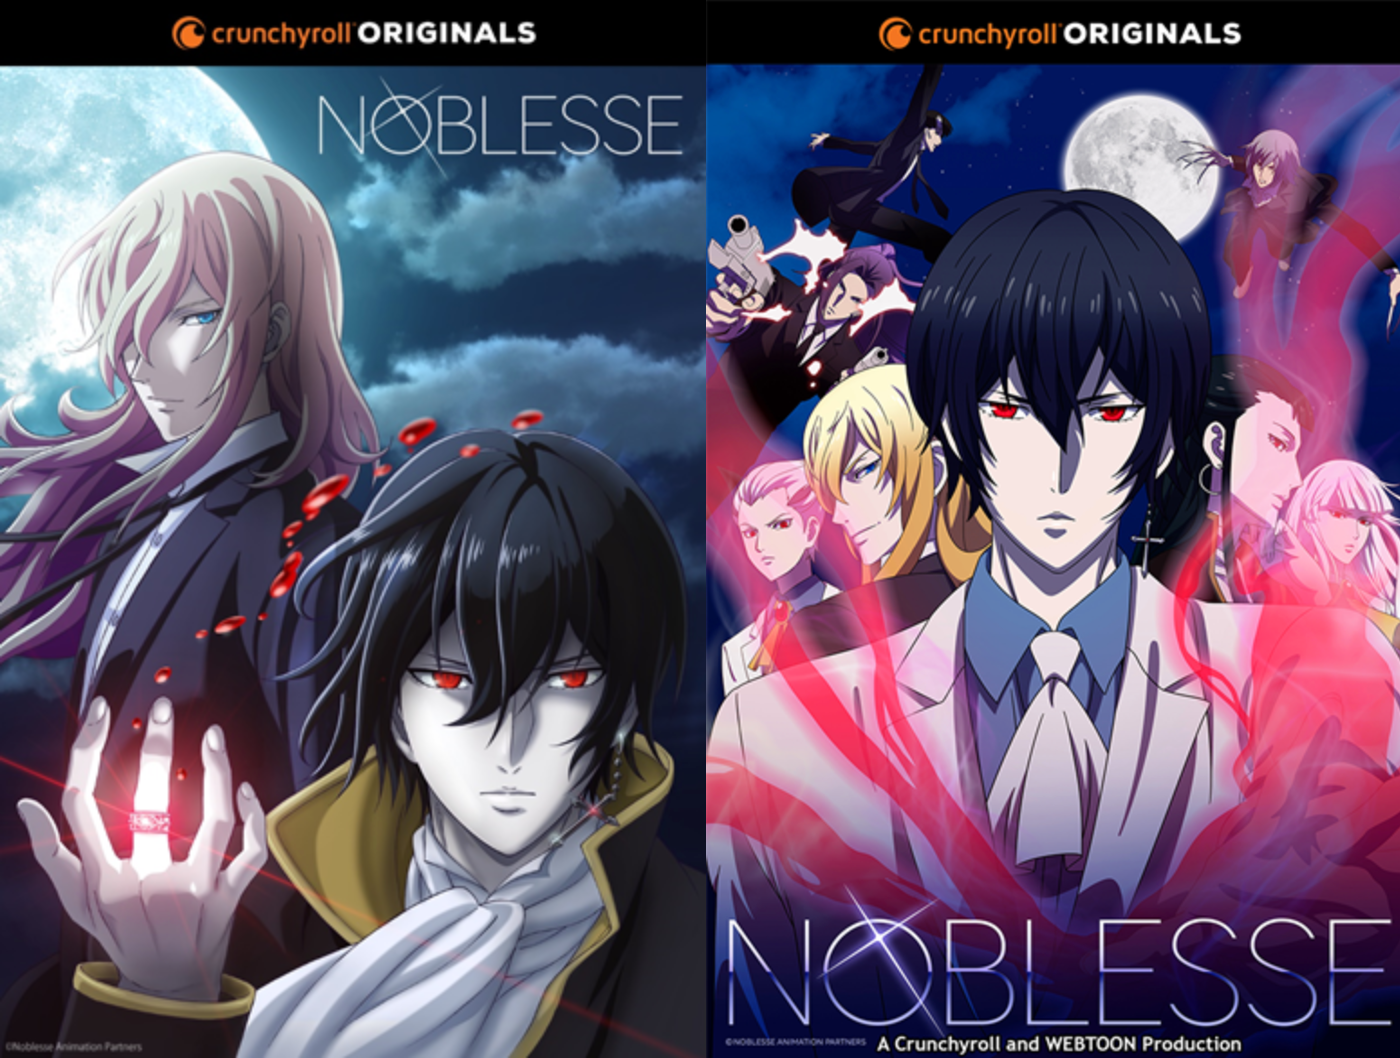 Thumbnail | Noblesse - Another Popular Webtoon Series Adapted to Anime